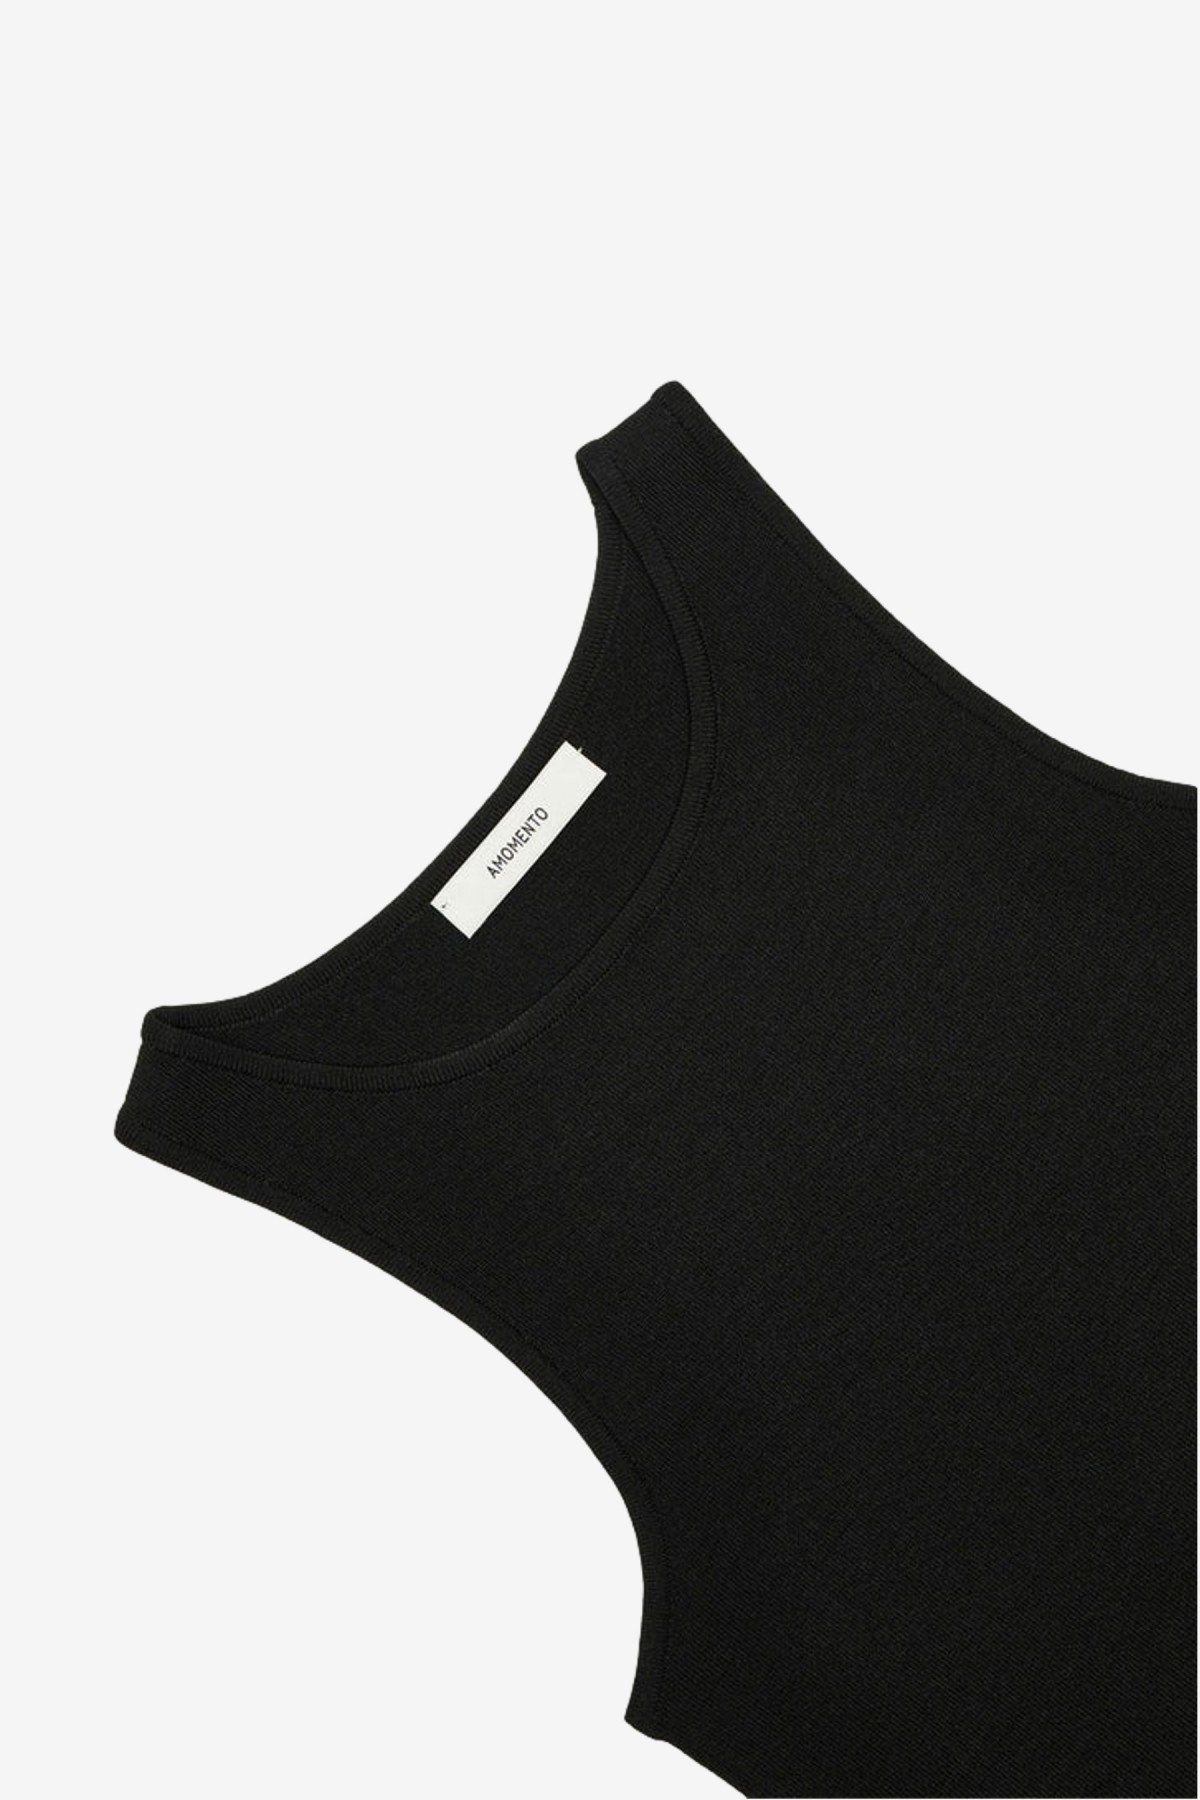 Amomento Cut-out Sleeveless Top in Black